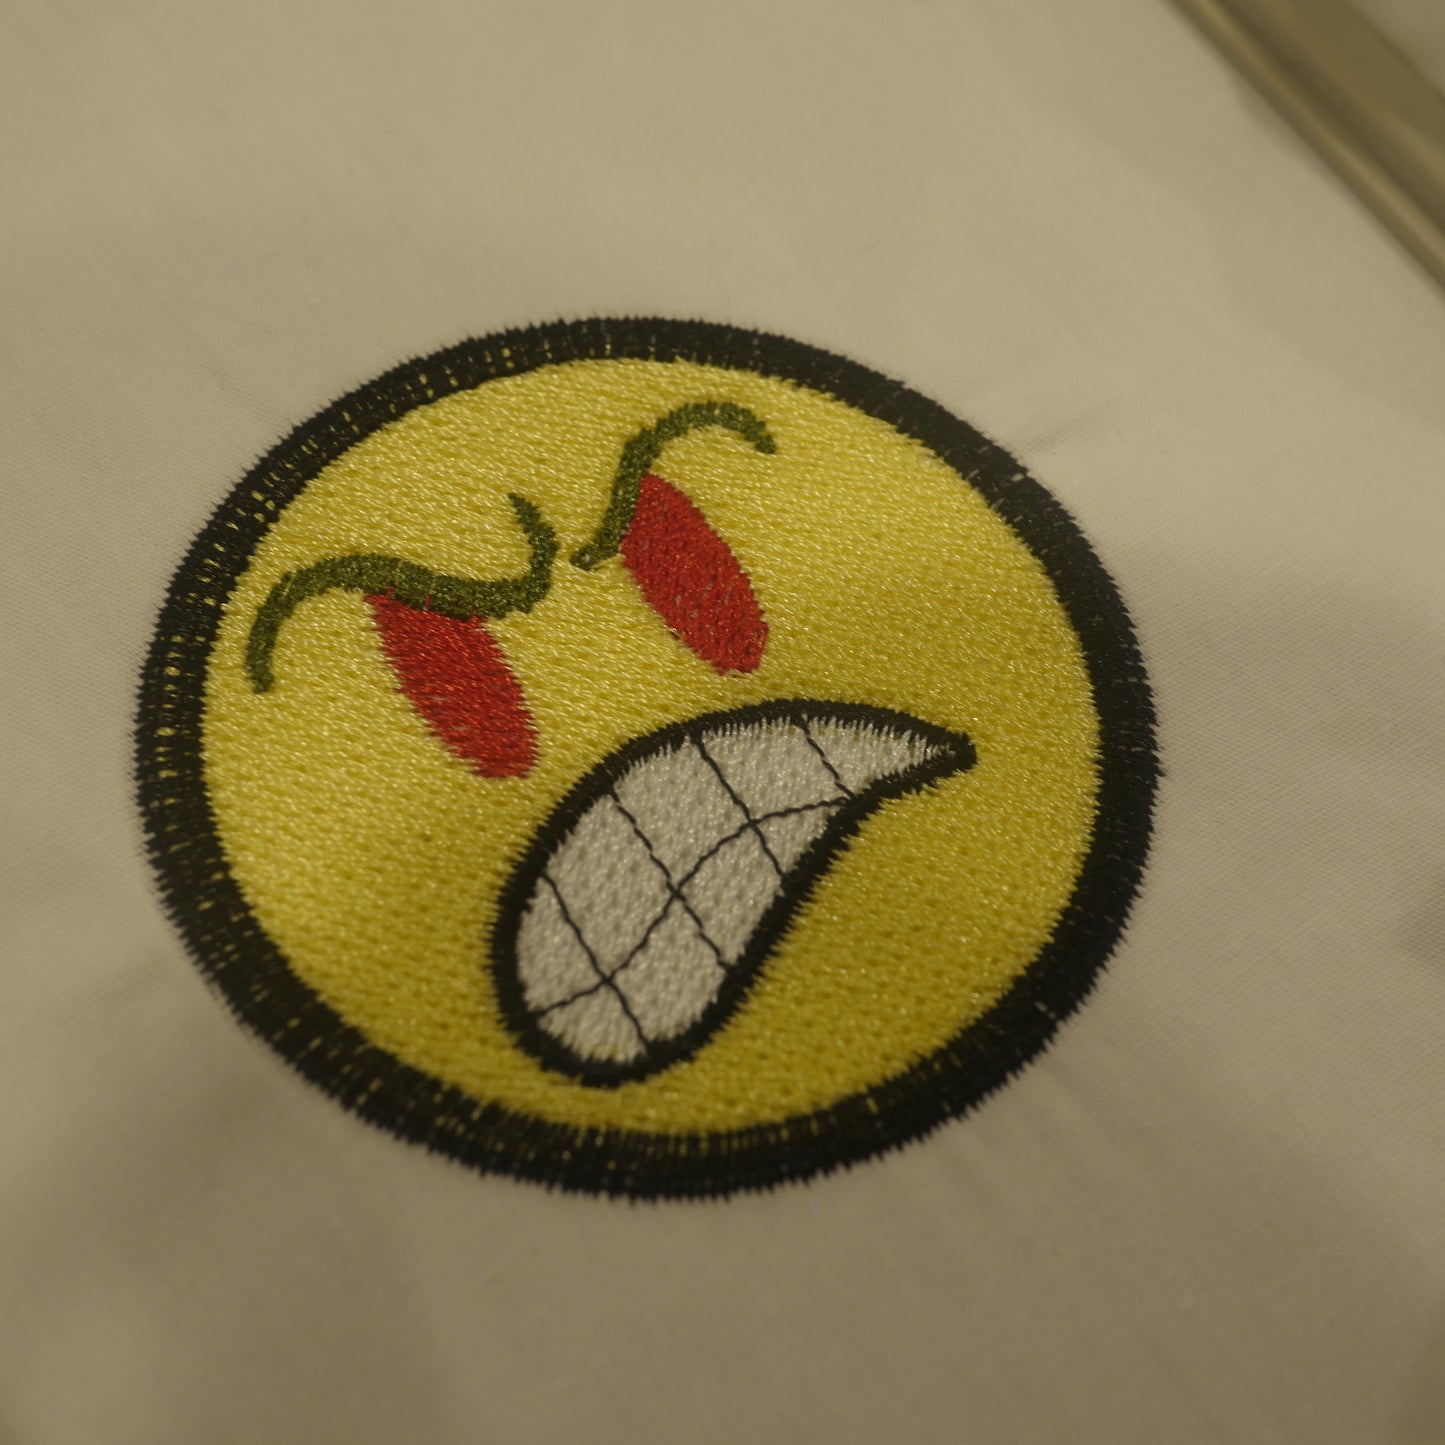 Angry Face Embroidery Design .DST